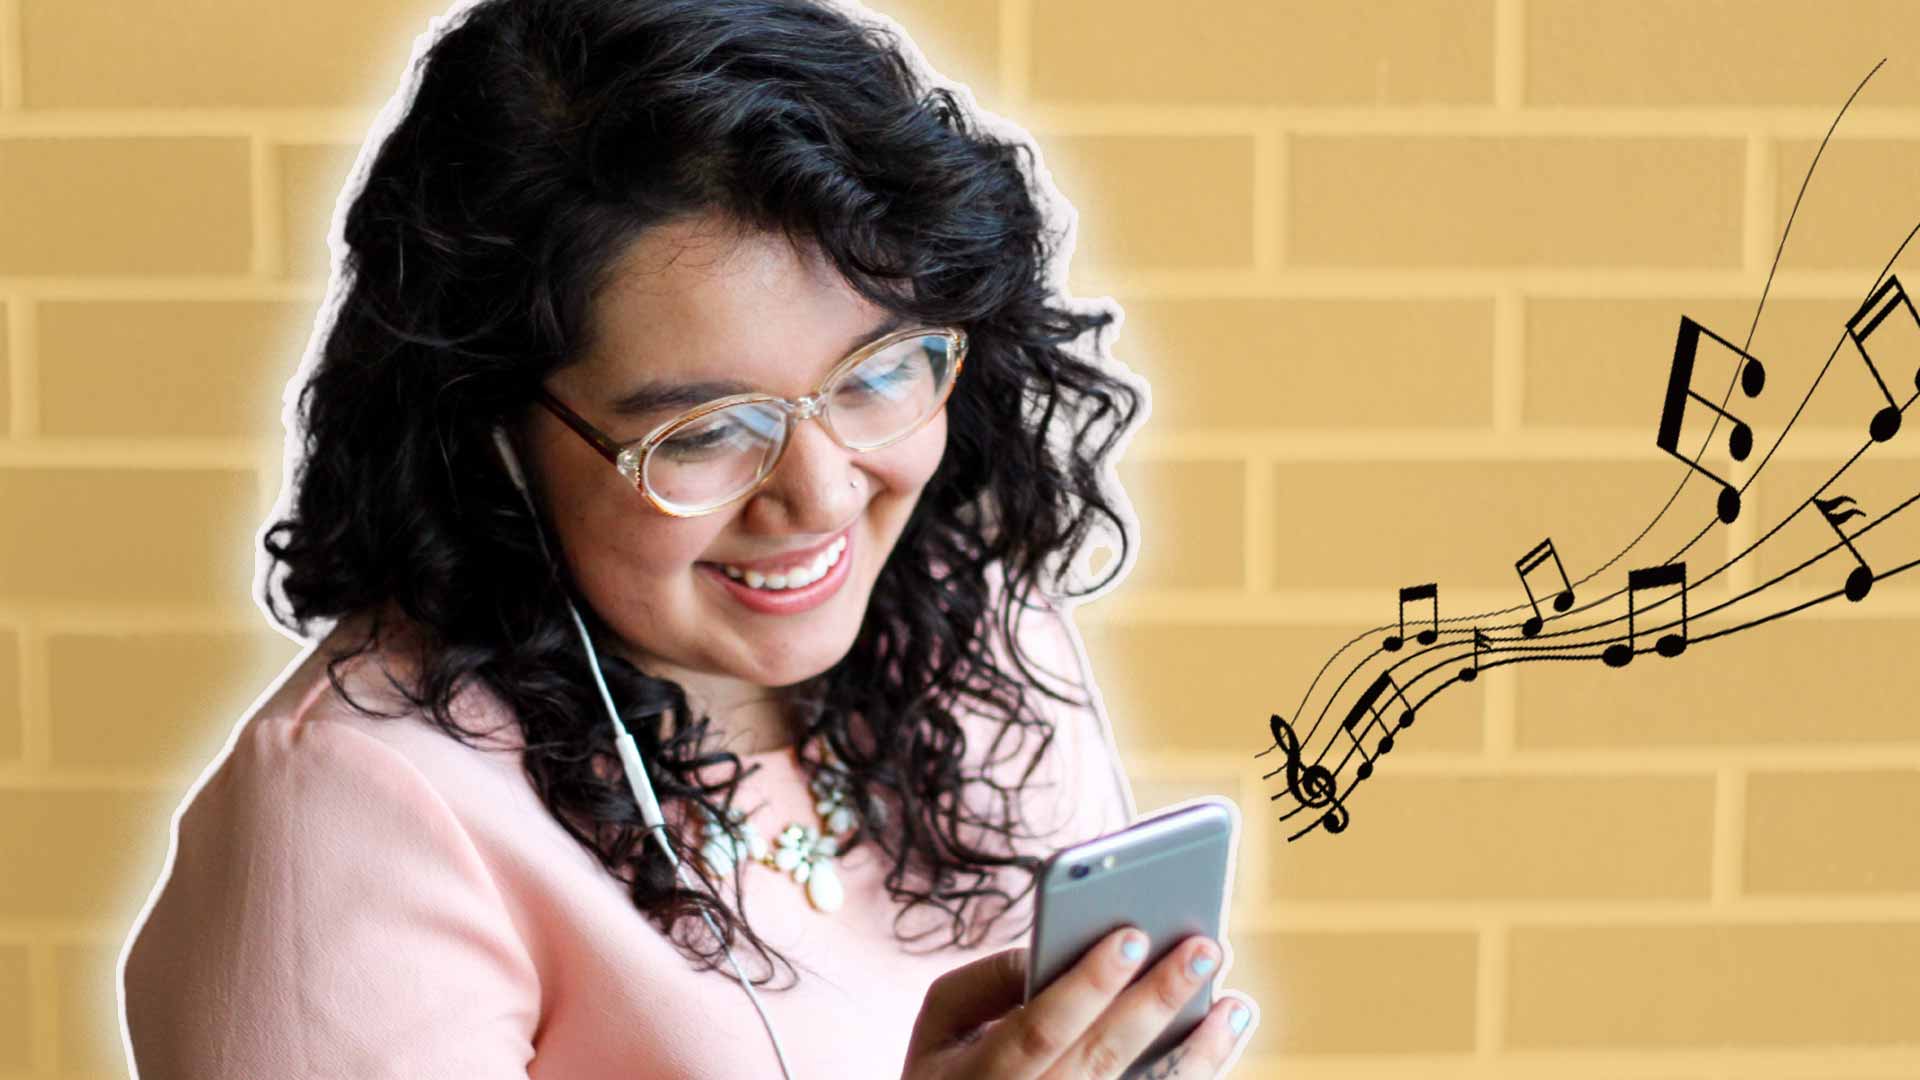 Hispanic Girl with Headphones in is listening to music